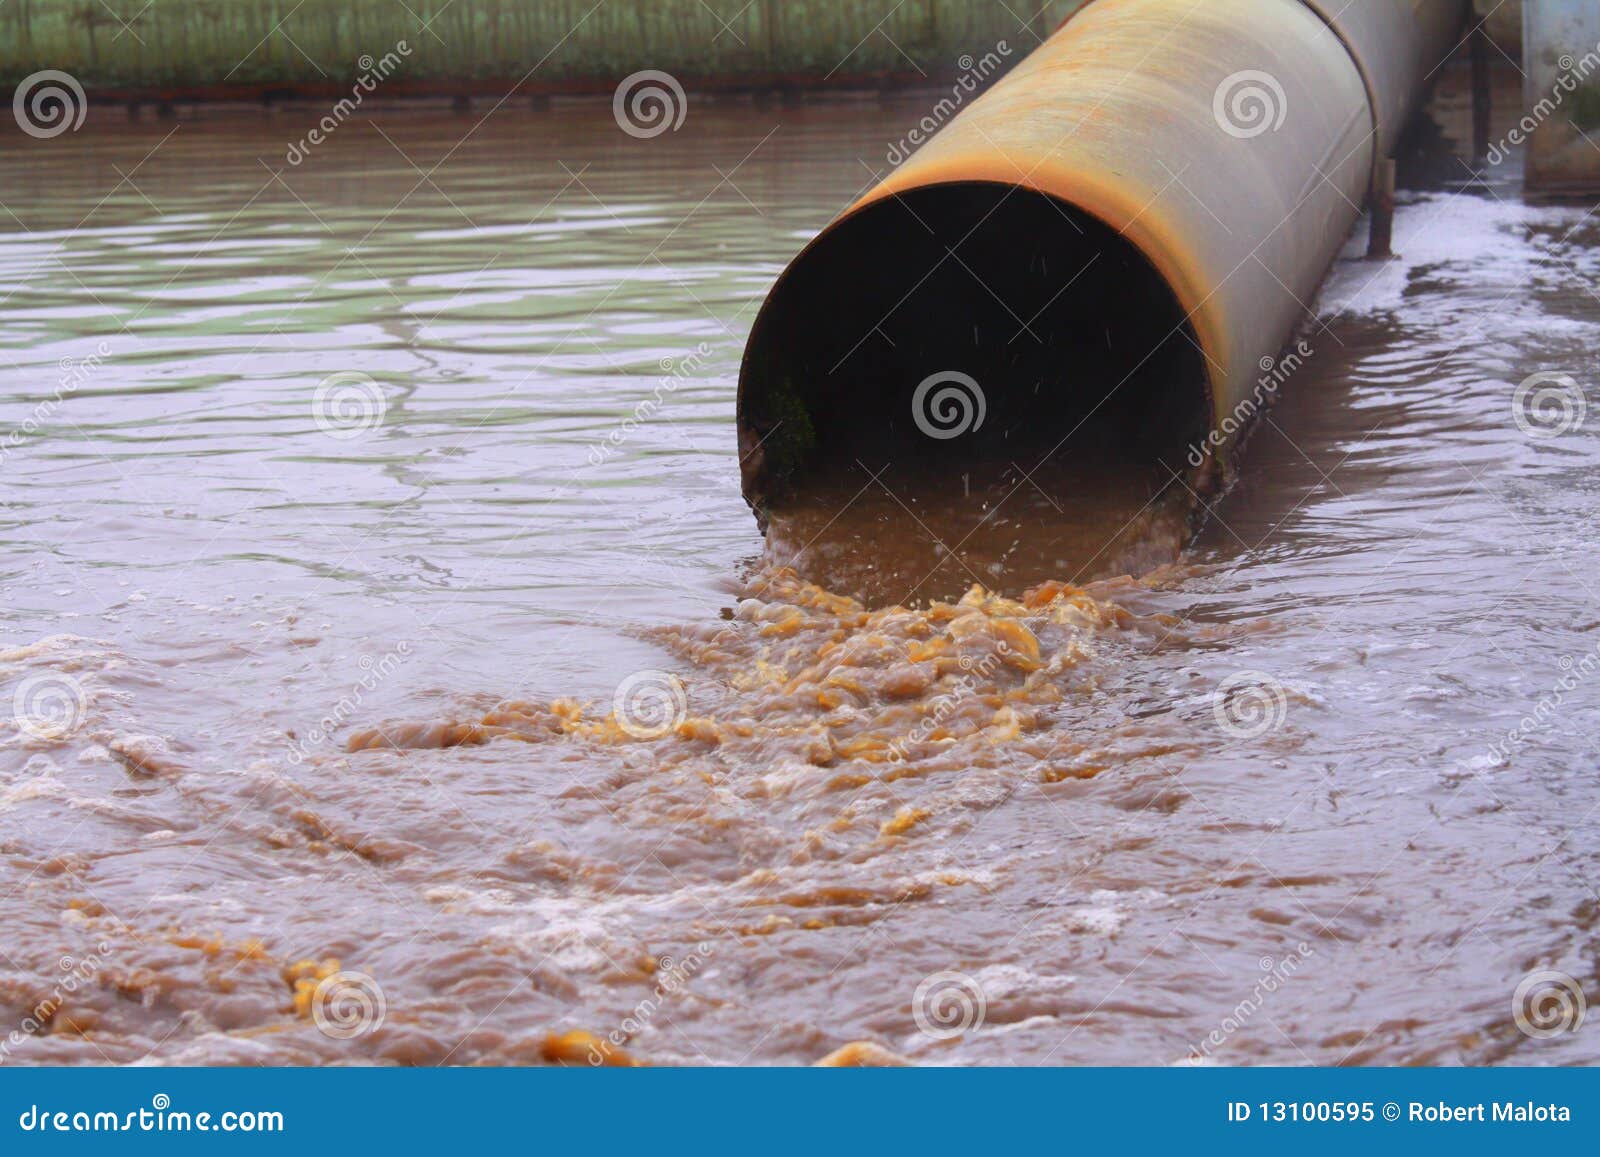 Waste Water Royalty Free Stock Photo - Image: 13100595